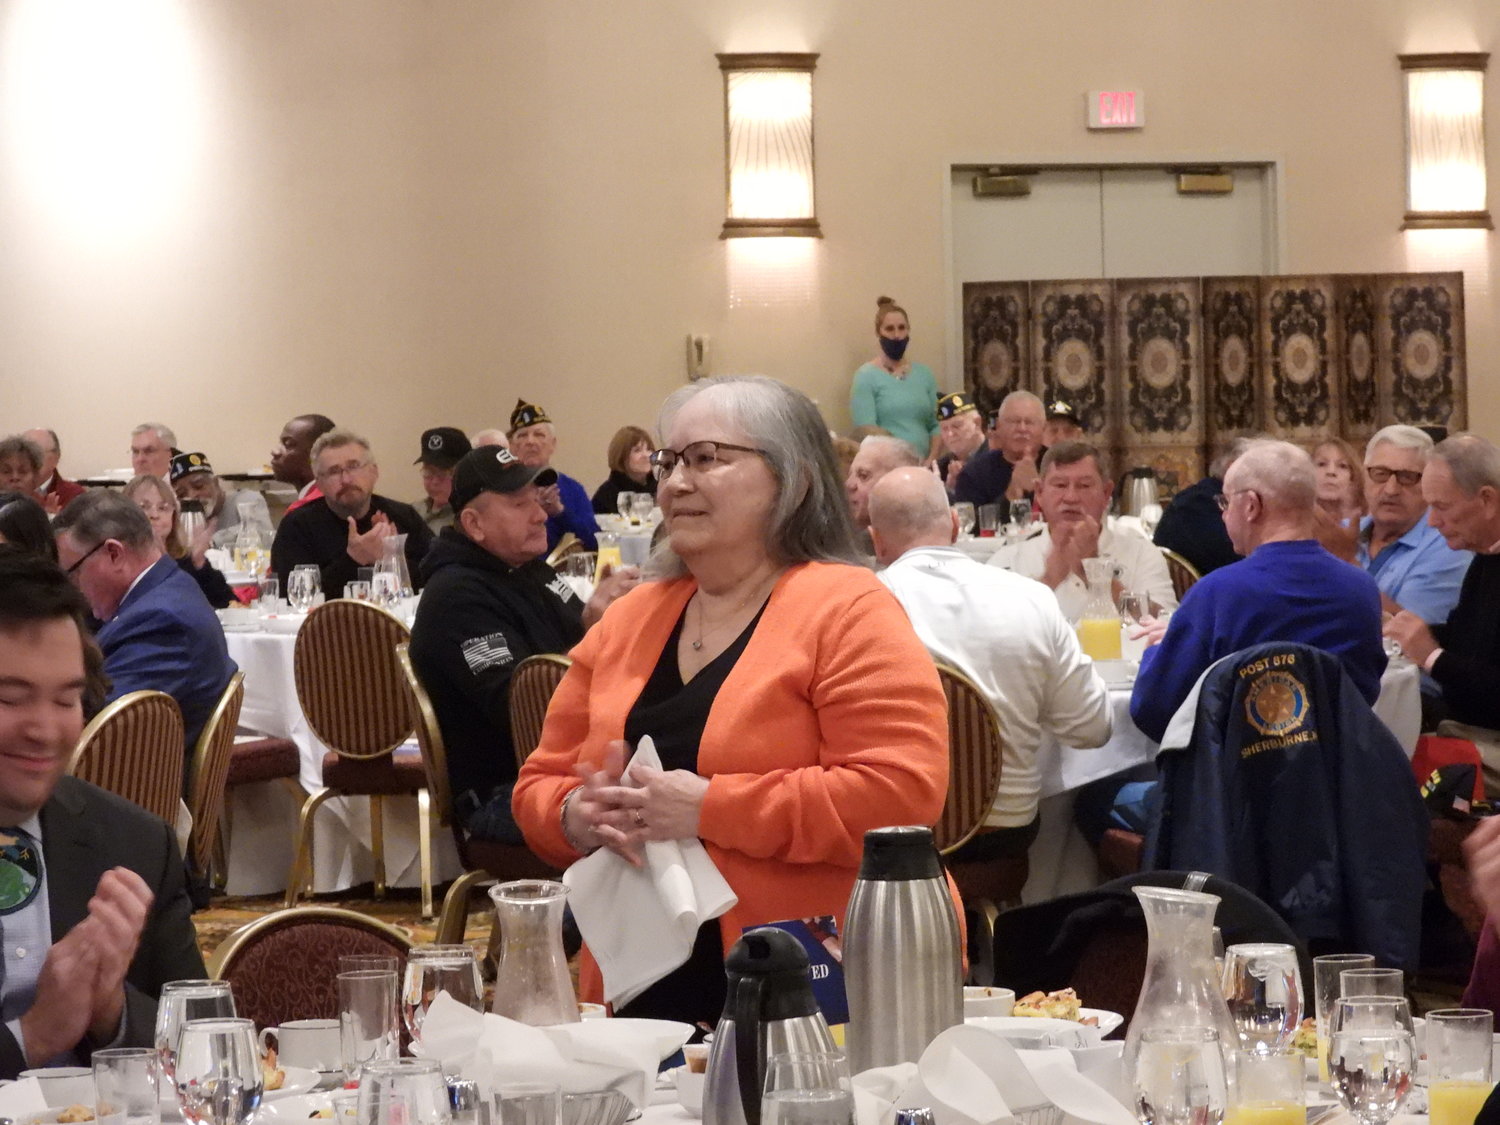 MOTHER HONORED — Kathy Kuhl, of the Wolf Clan, is a mother of five, who has seen three children serve in the American Armed Forces. She was honored at the 20th annual Veterans Recognition Ceremony and Breakfast for her family's service.